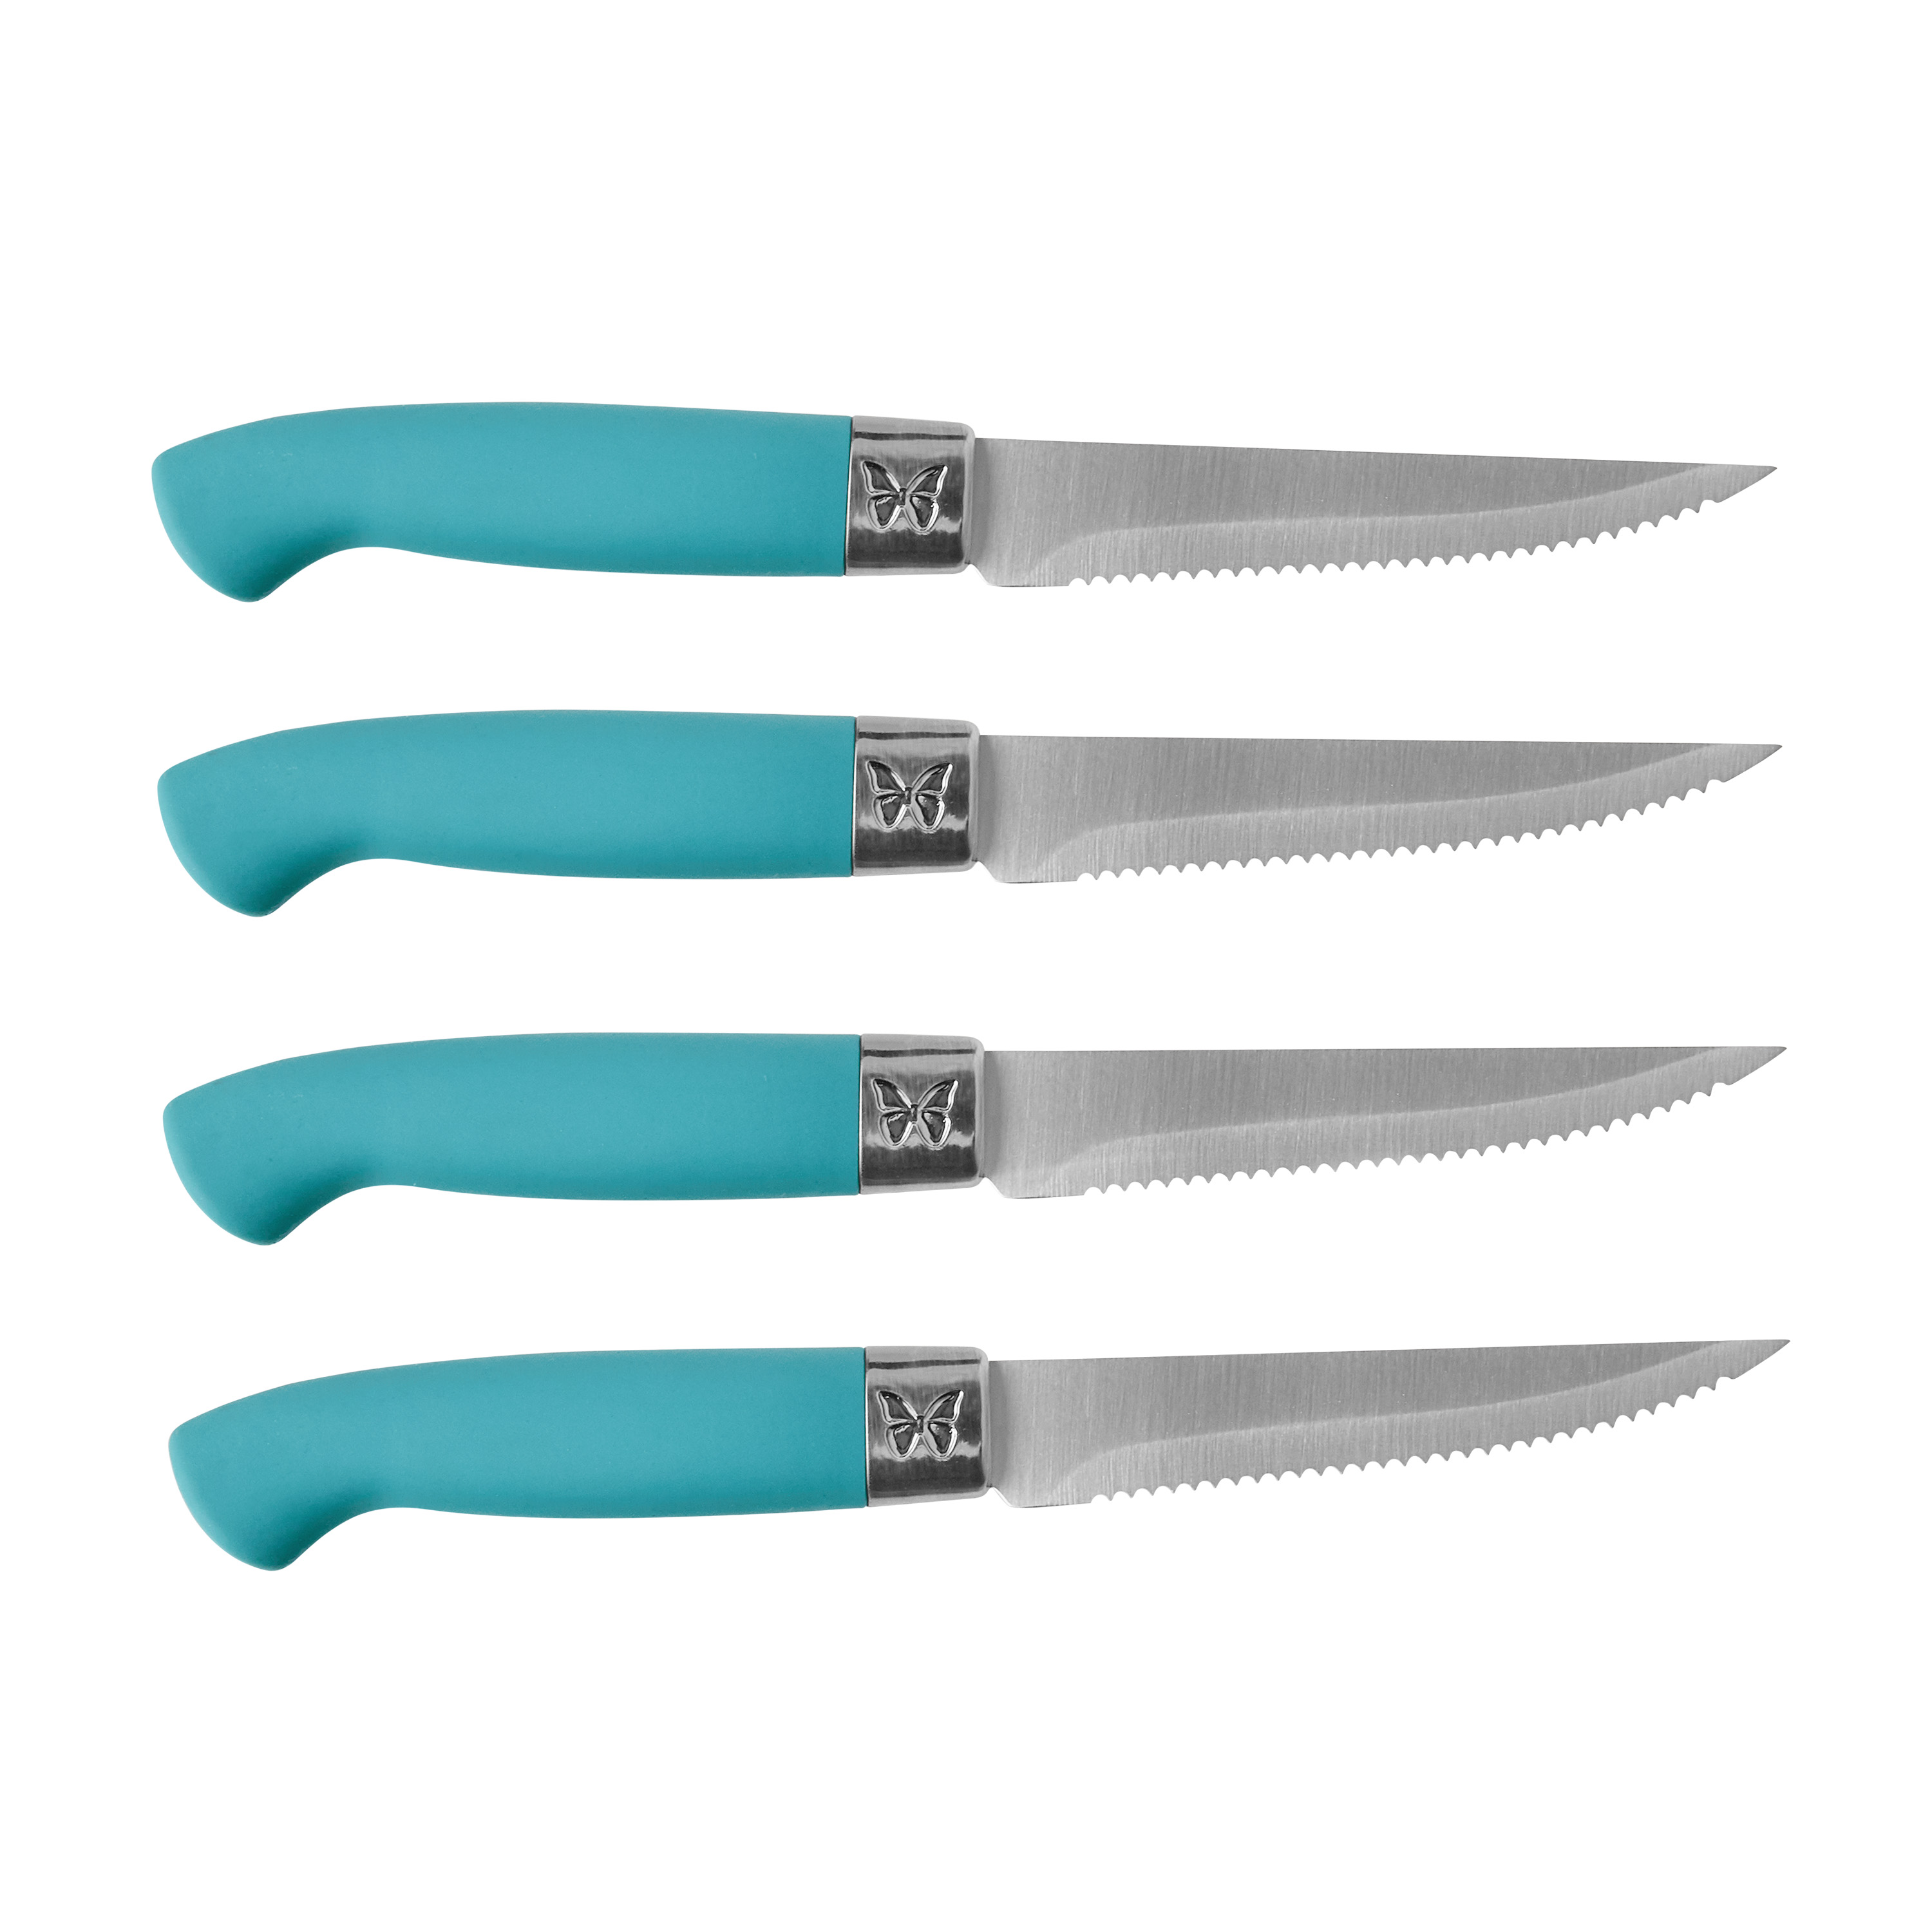 The Pioneer Woman Breezy Blossoms 11-Piece Stainless Steel Knife Block Set, Teal - image 4 of 5